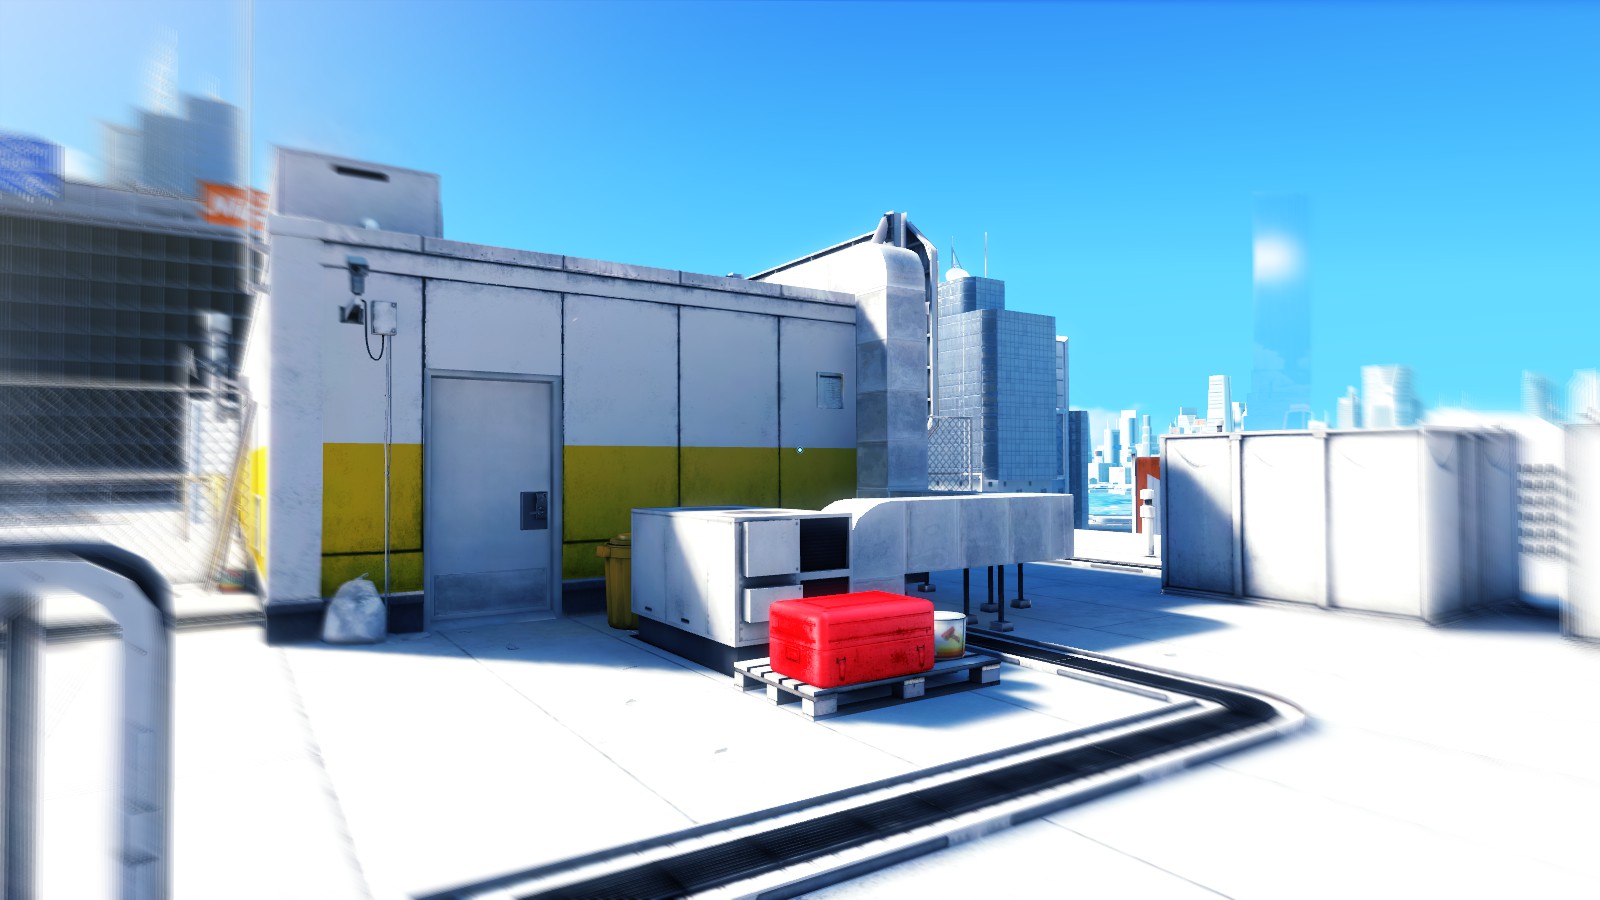 Various obstacles can be used to progress in Mirror's Edge, the path to take being clear to the player thanks to those obstacles being highlighted in red against the otherwise bright, but muted, cityscape backdrop.